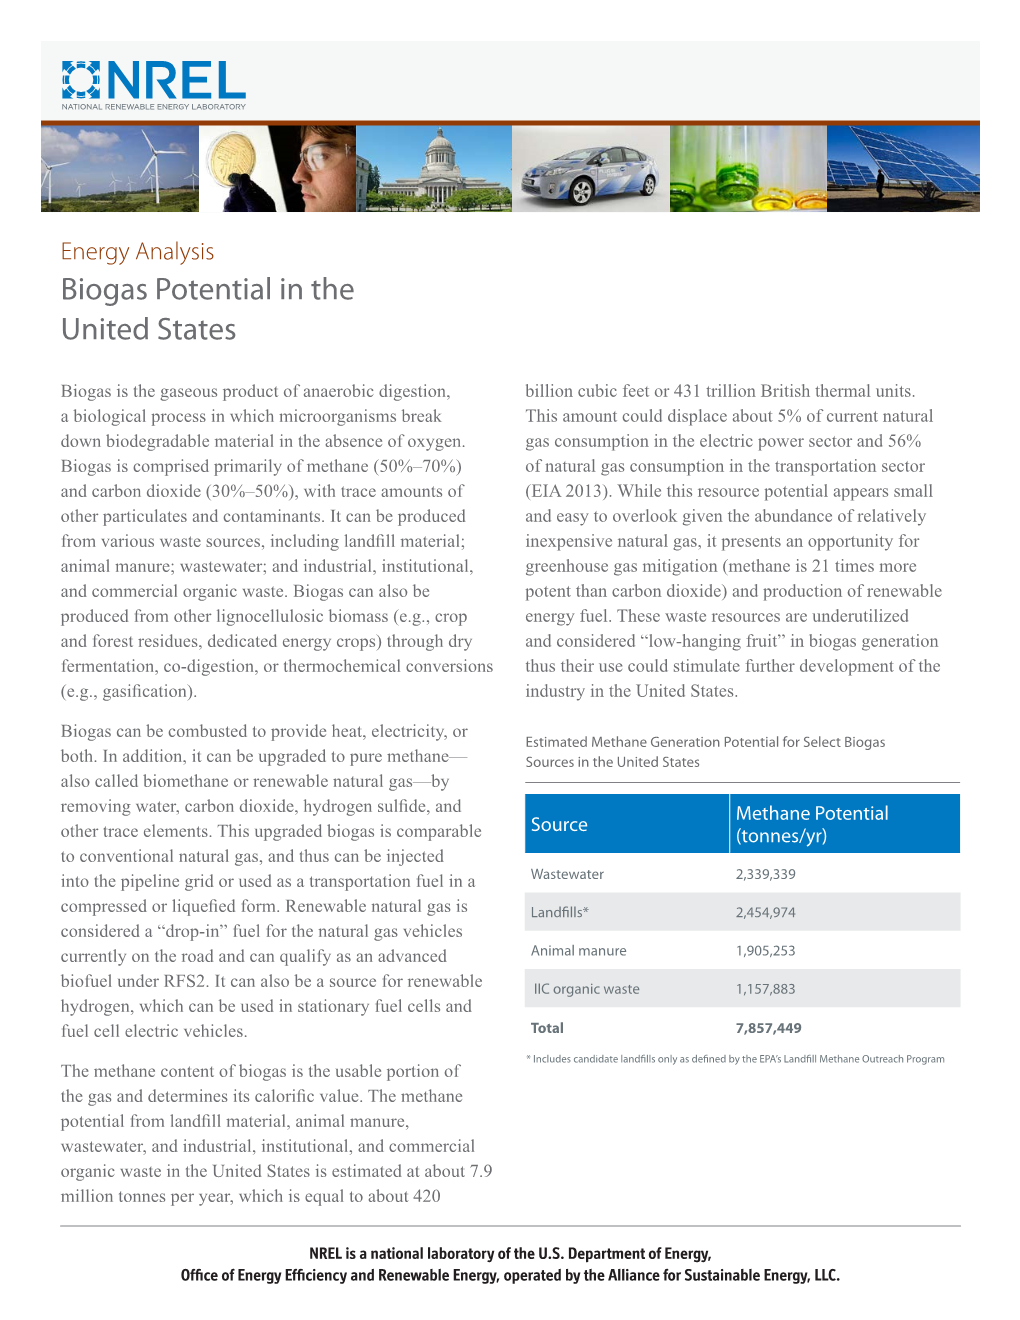 Biogas Potential in the United States (Fact Sheet), Energy Analysis, NREL